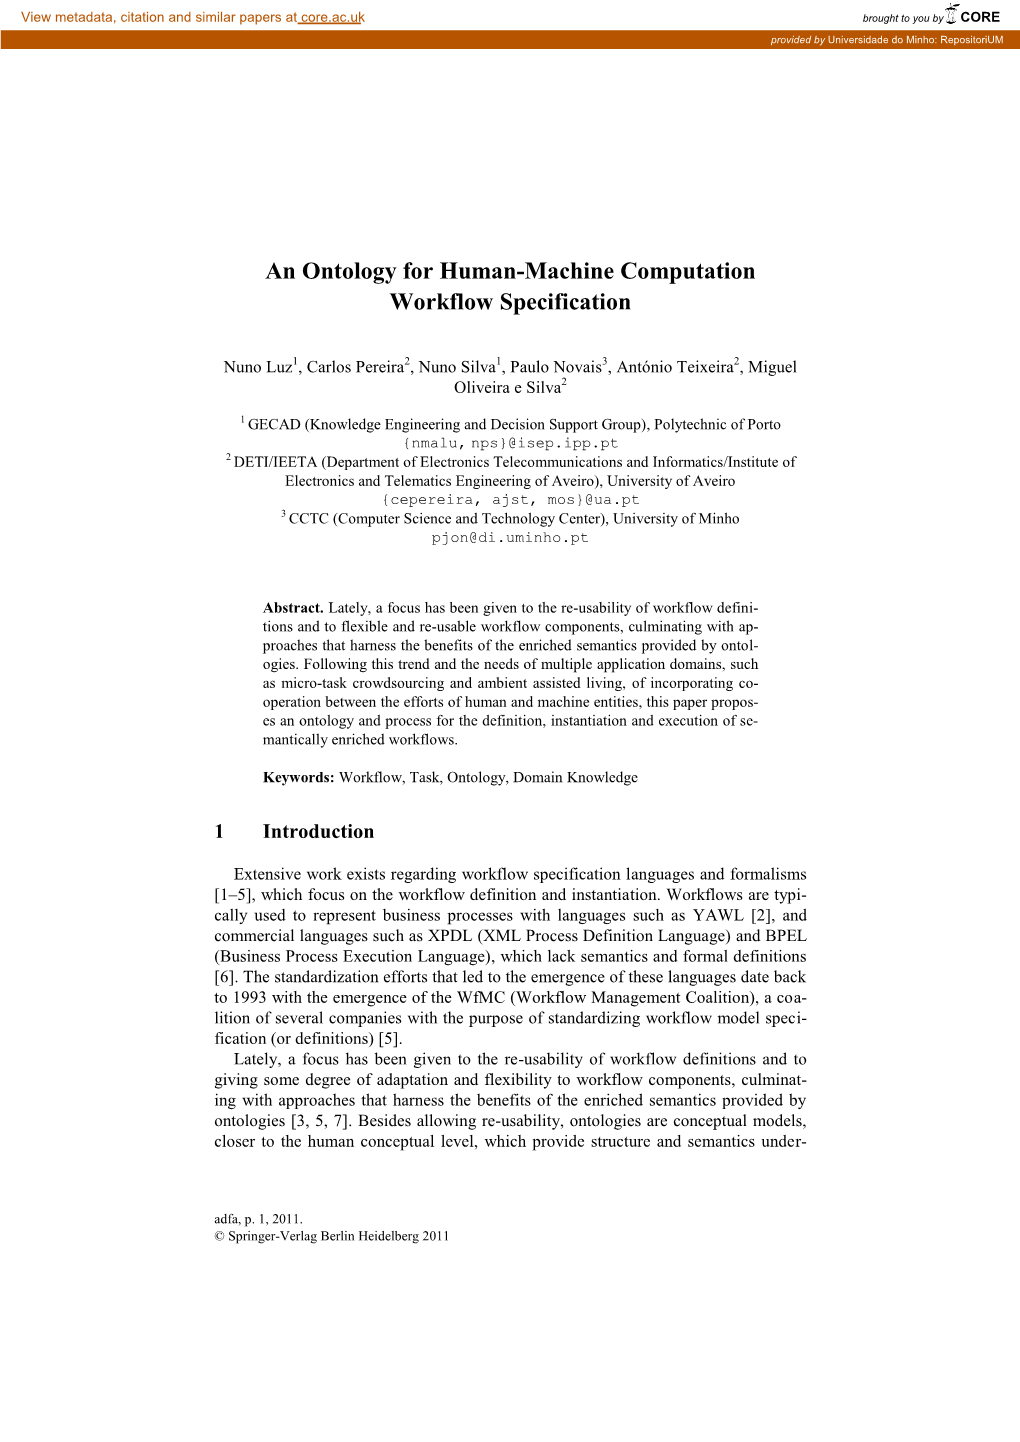 An Ontology for Human-Machine Computation Workflow Specification